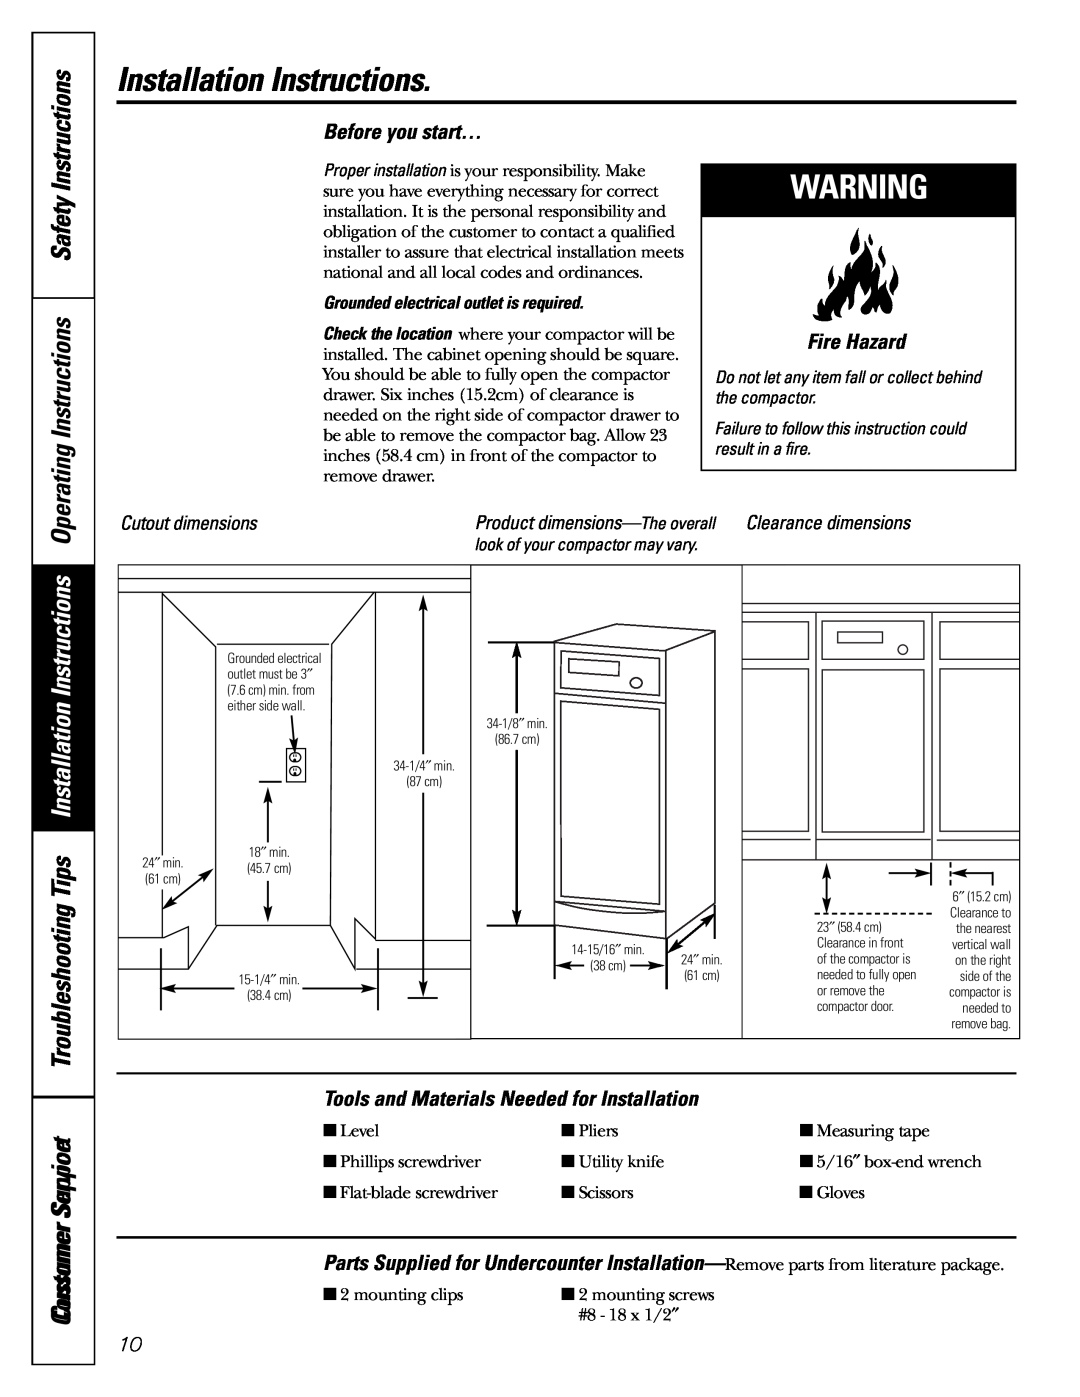 GE GCG1520 Installation Instructions, ConsumerSupportustoervice, Before you start…, Fire Hazard, Cutout dimensions 